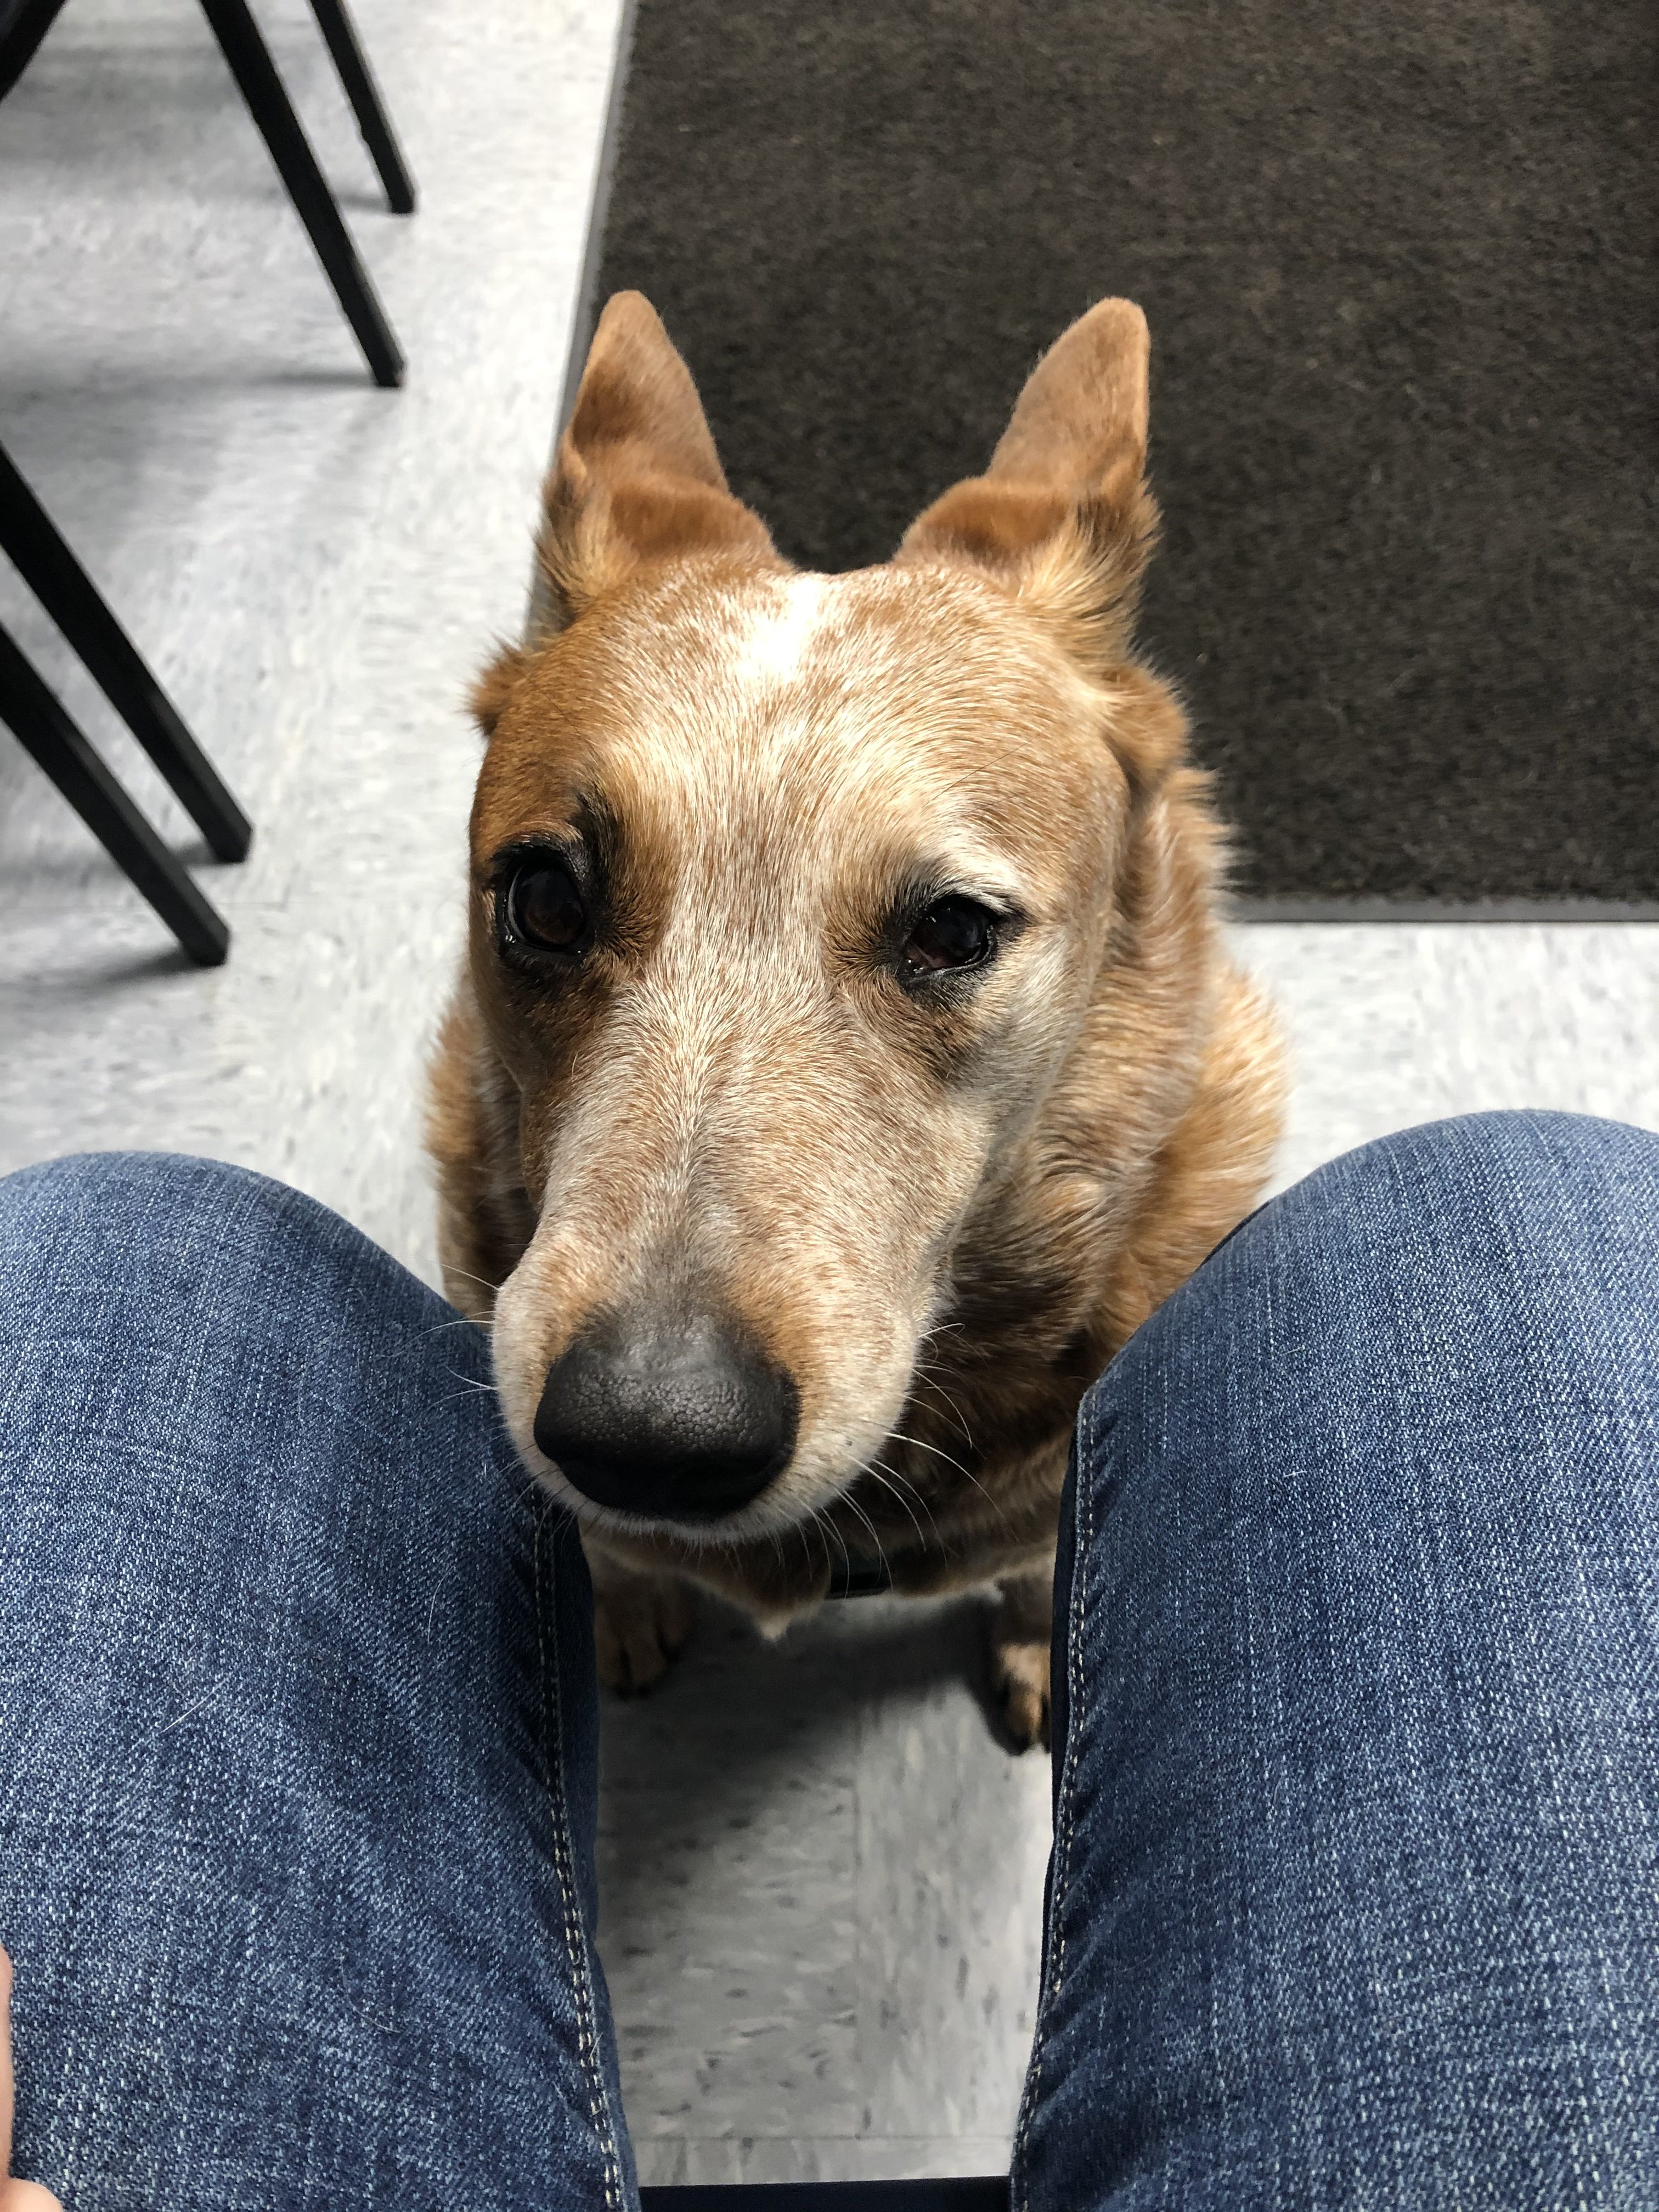 Dog sitting in front of person with ears back